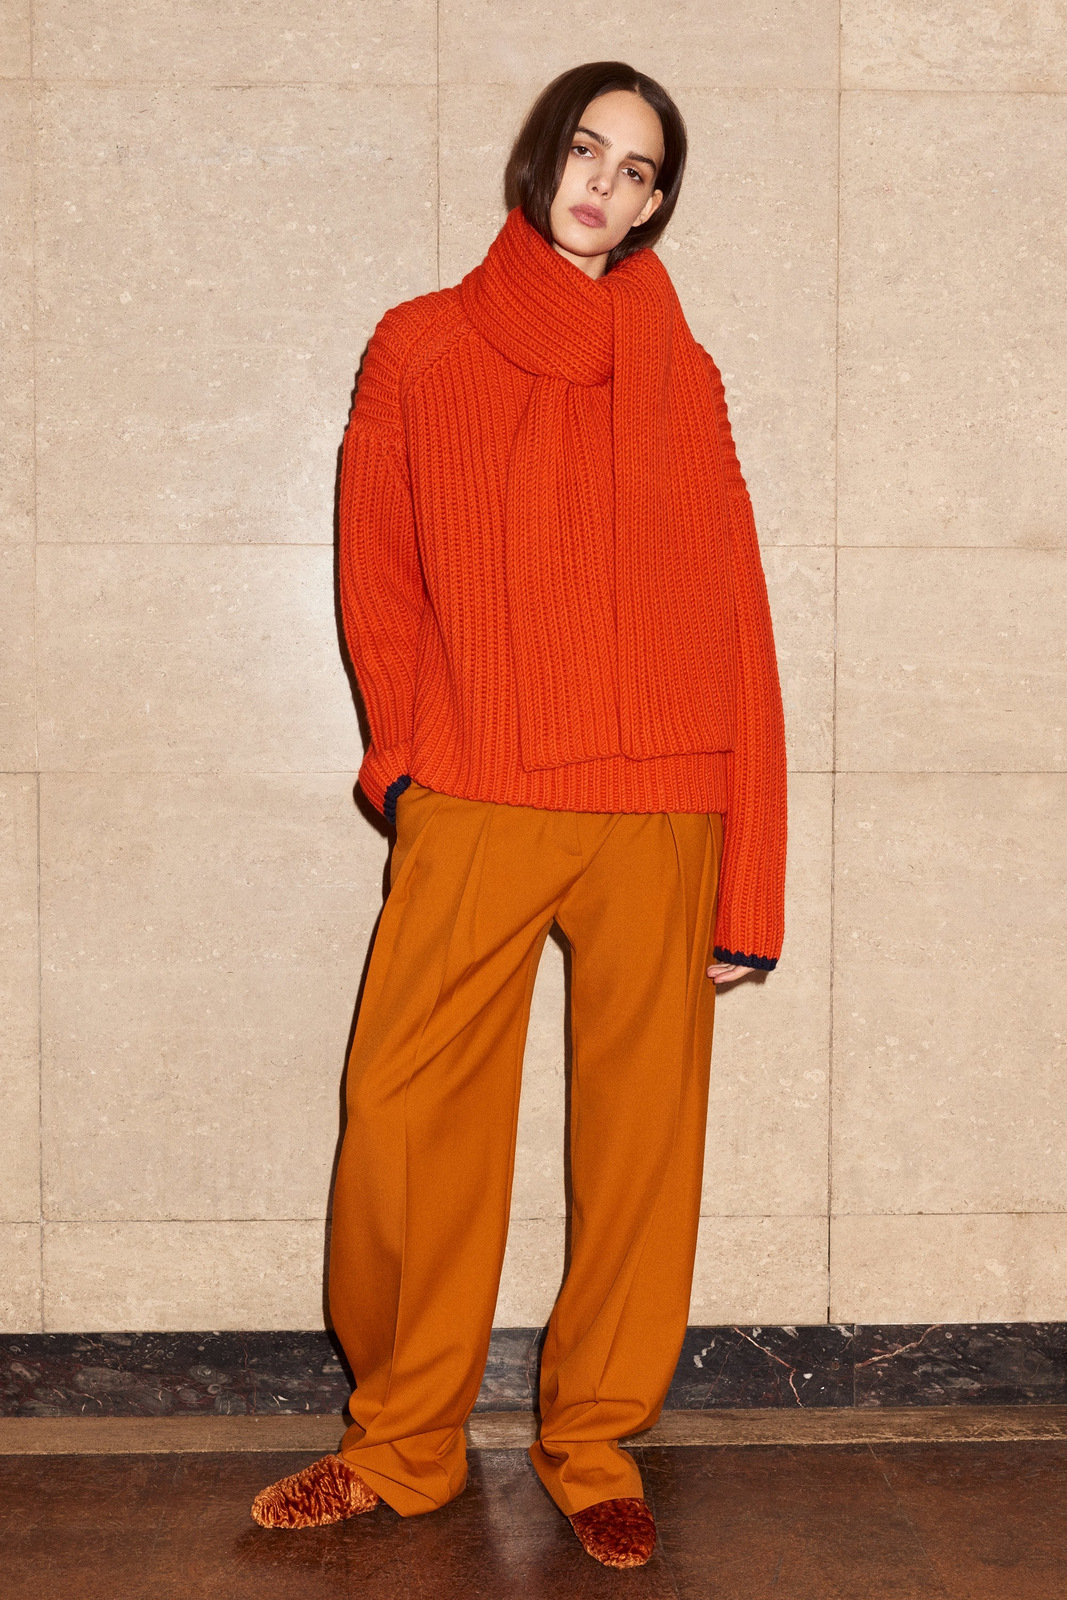 Oversized Knitted Sweater Fall 2017 - Victoria Victoria Beckham Pre-Fall 2017